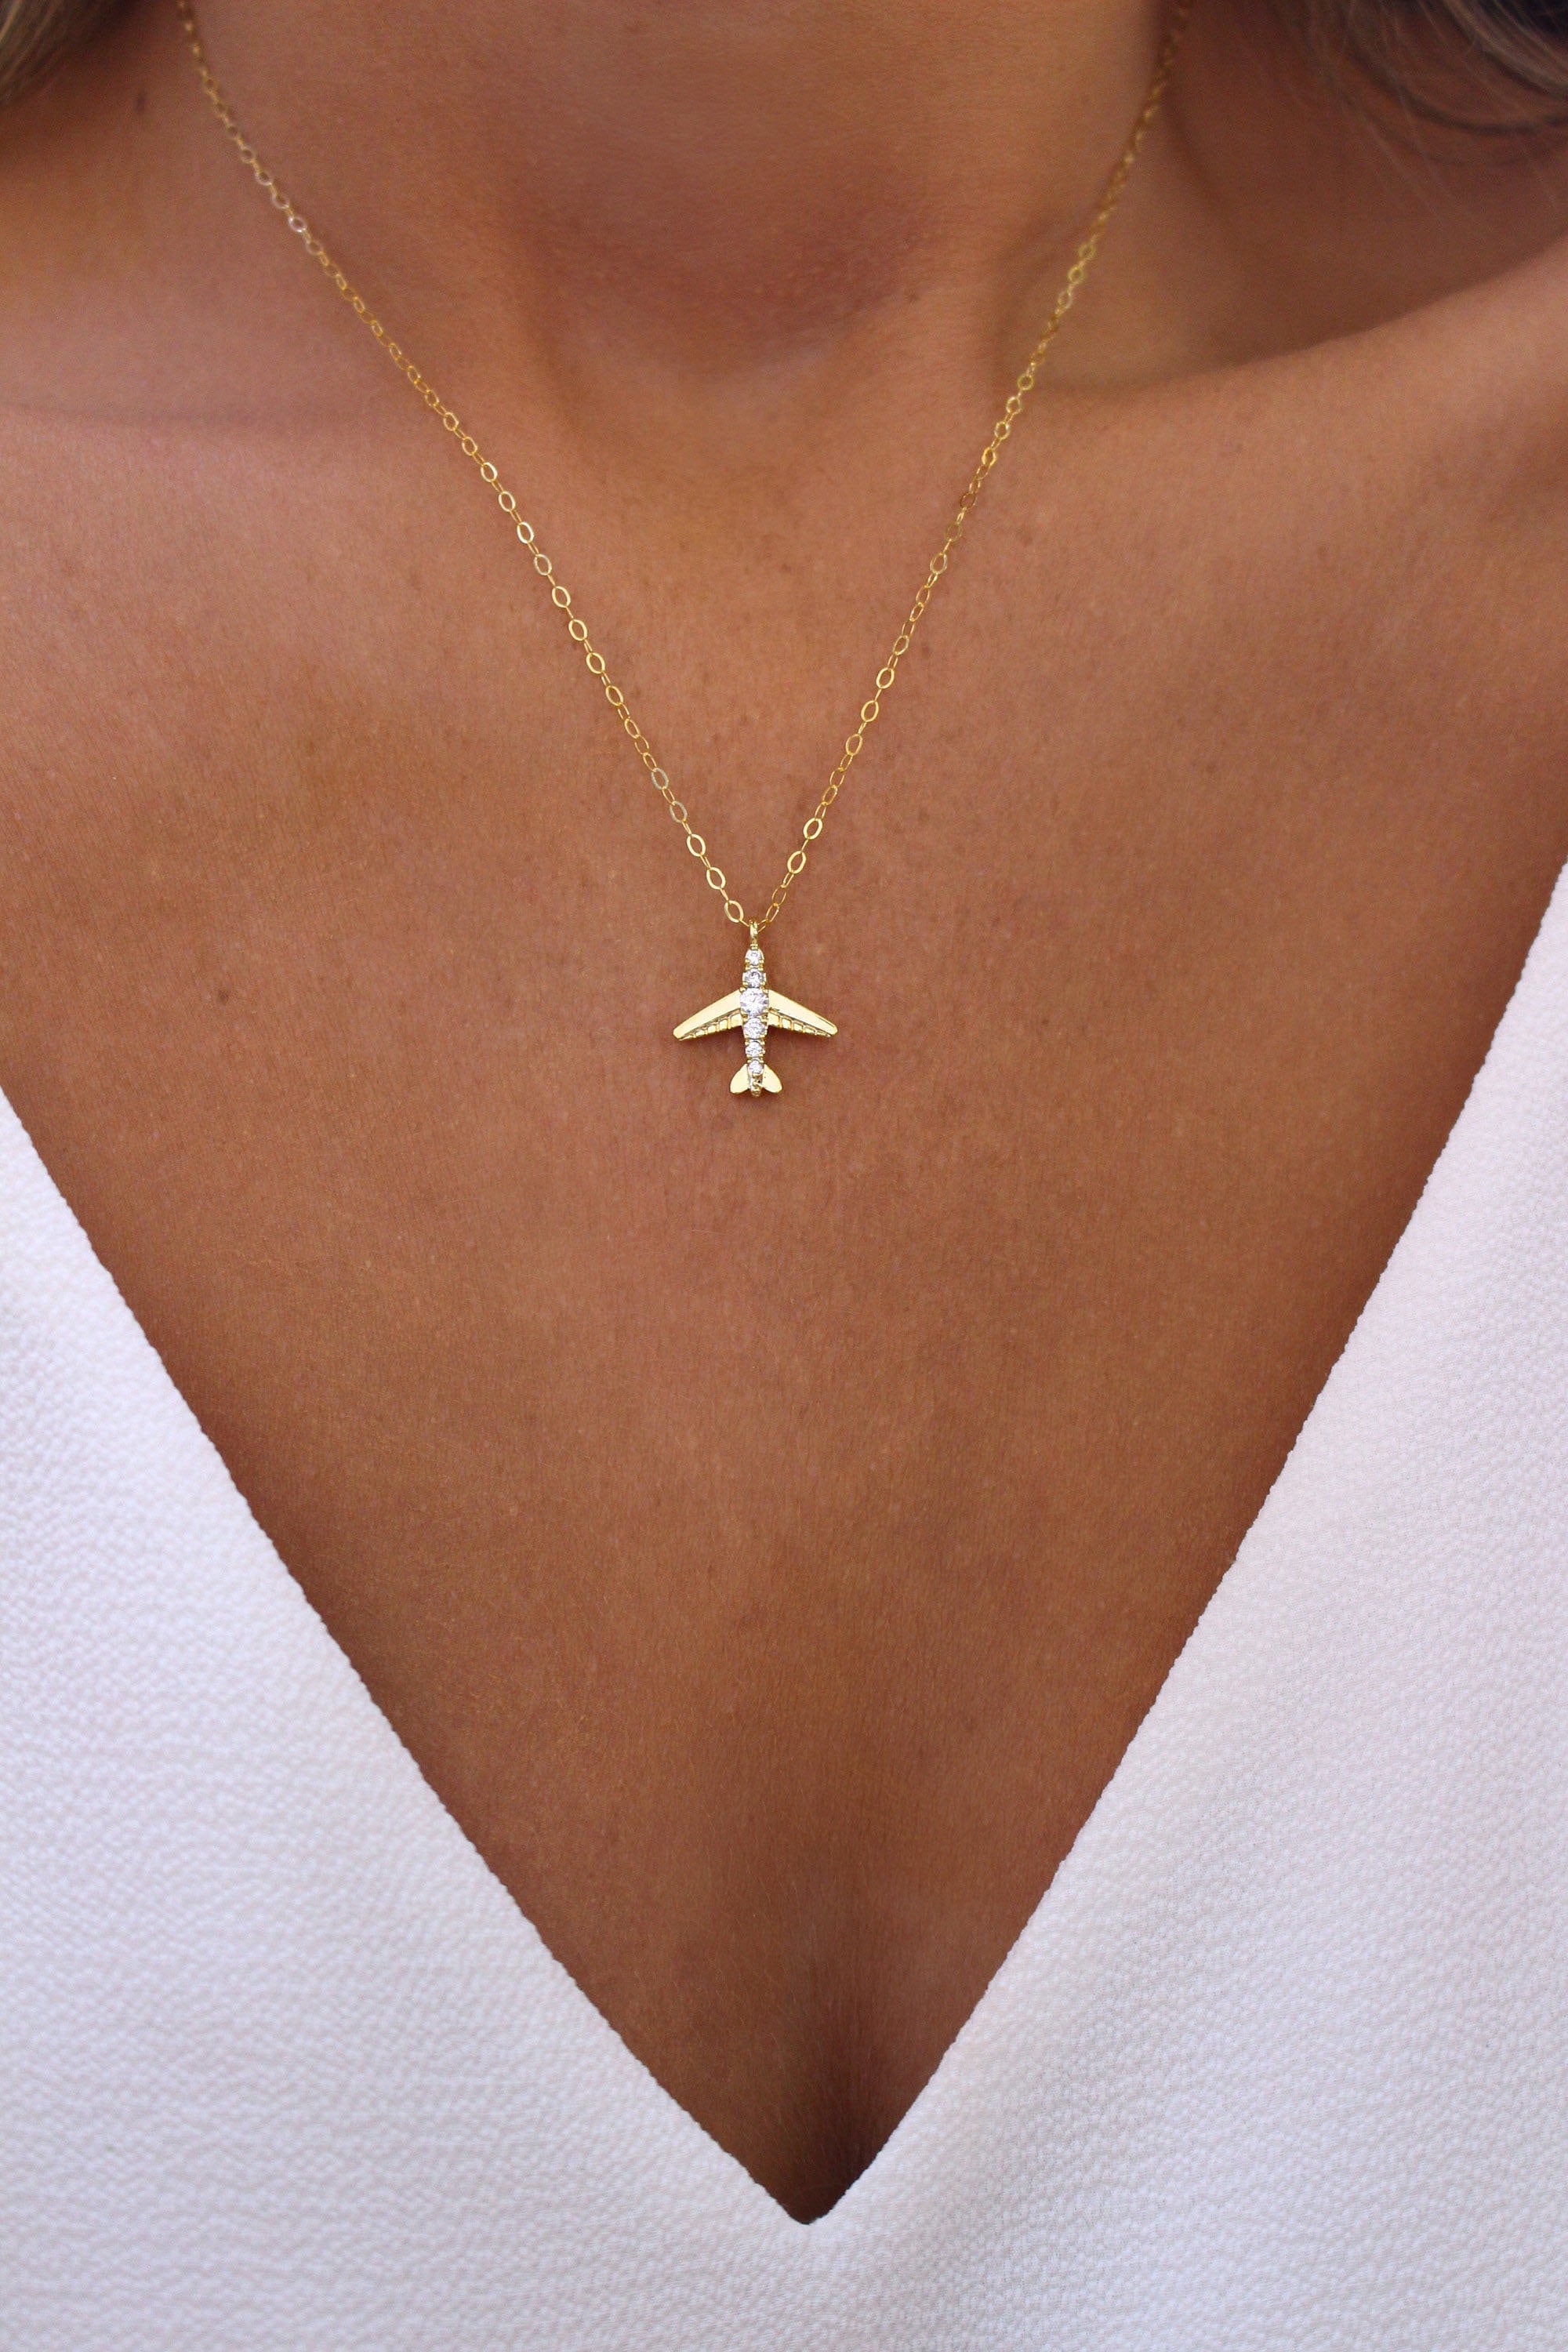 Elegant Airplane Necklace for Your Special Someone